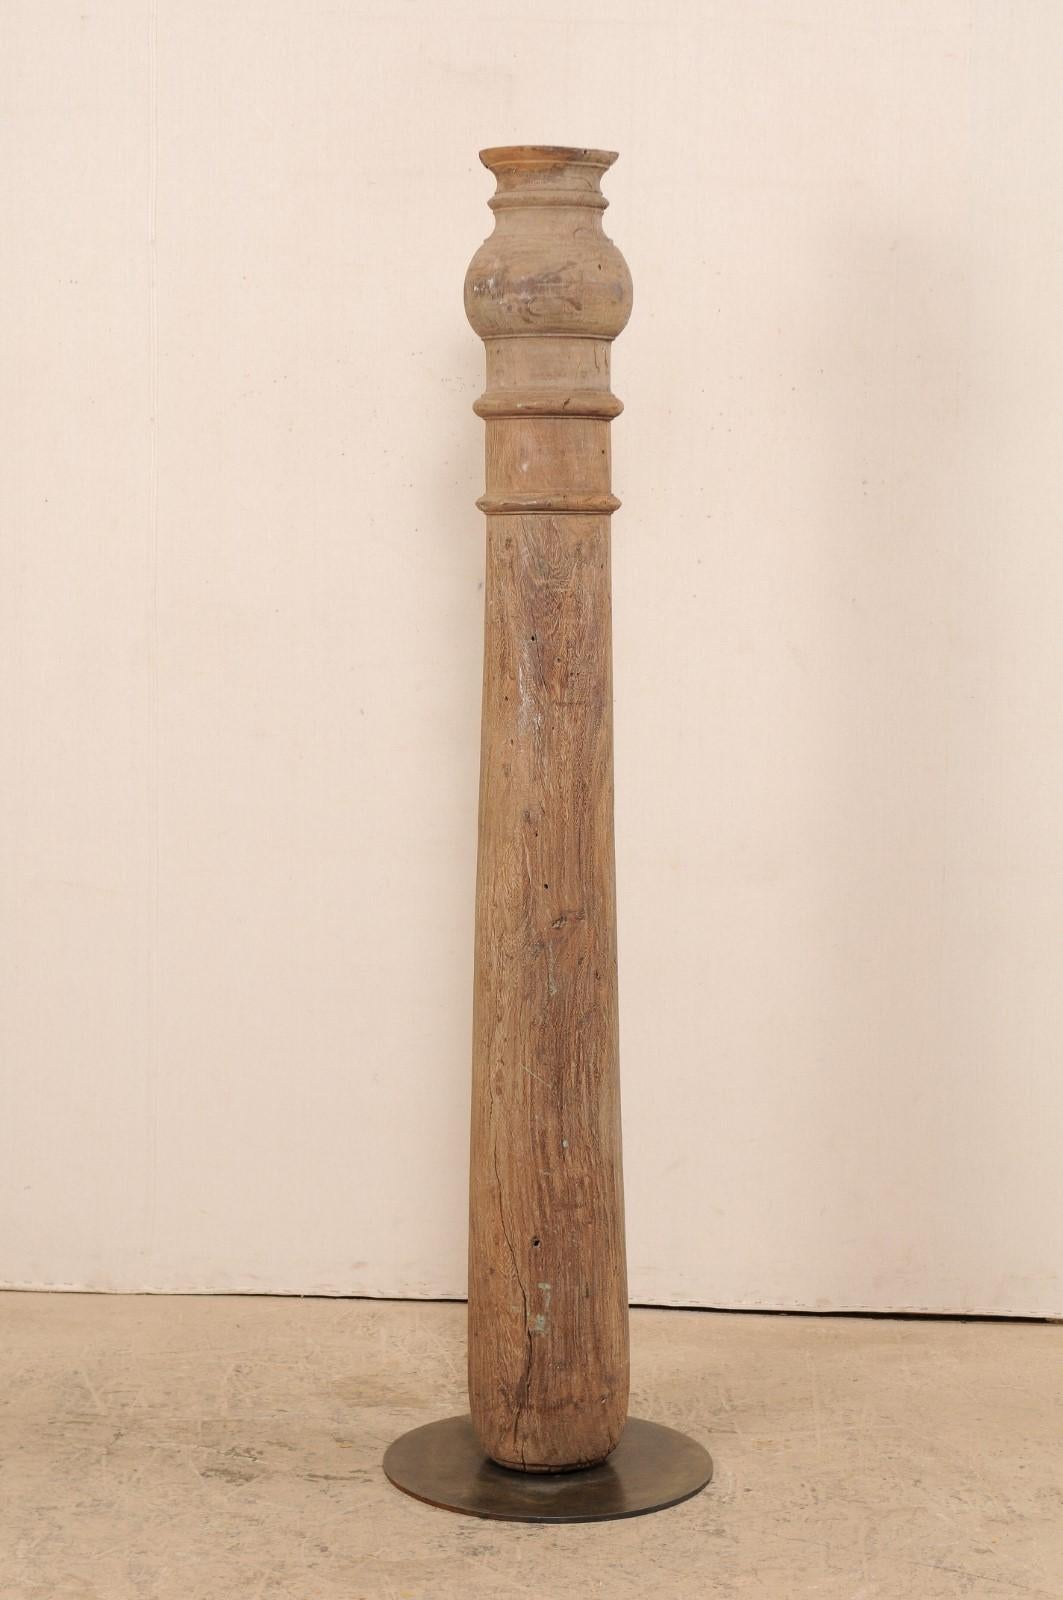 A single 19th century British Colonial carved wood column with custom Stand. This antique hand carved wooden architectural element from India, which stands just under 6.5 feet in height, features a slender, rounded column with ringed carvings and